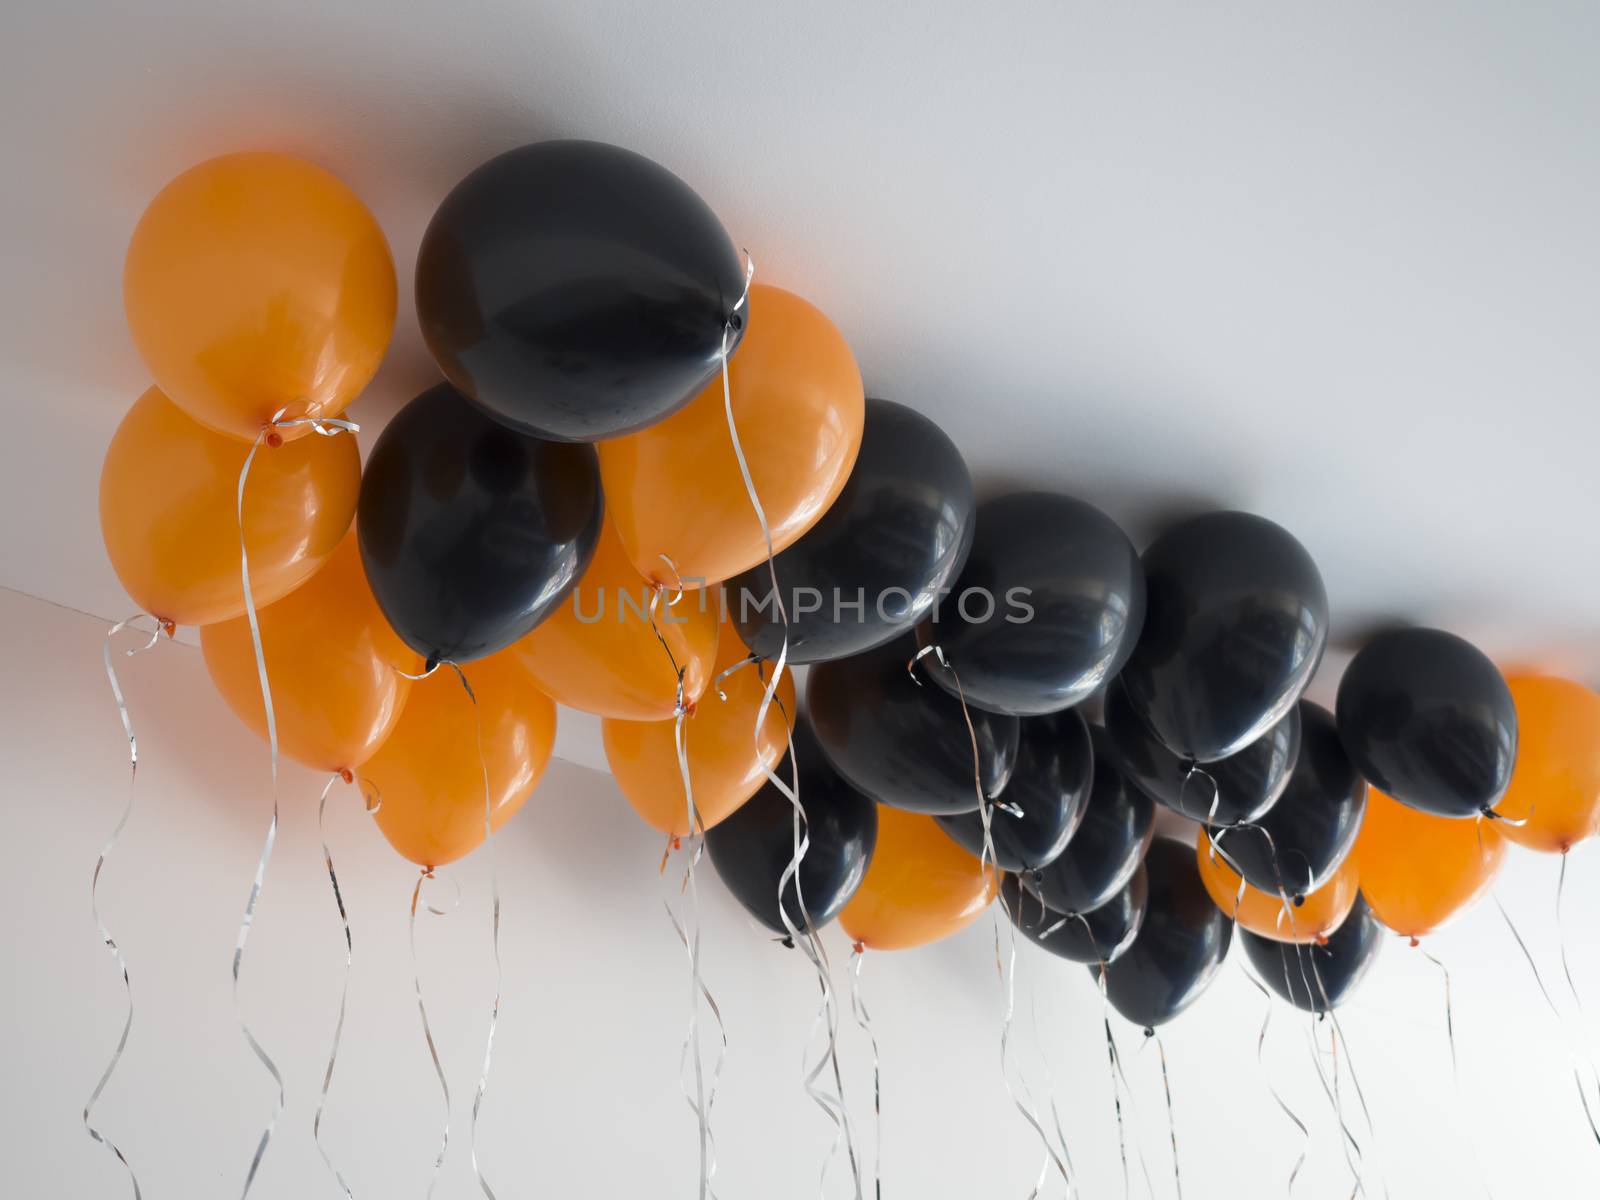 bunch of orange and black air balloons for halloween or birthday over white ceiling background. Holidays, decoration and party concept by Henkeova